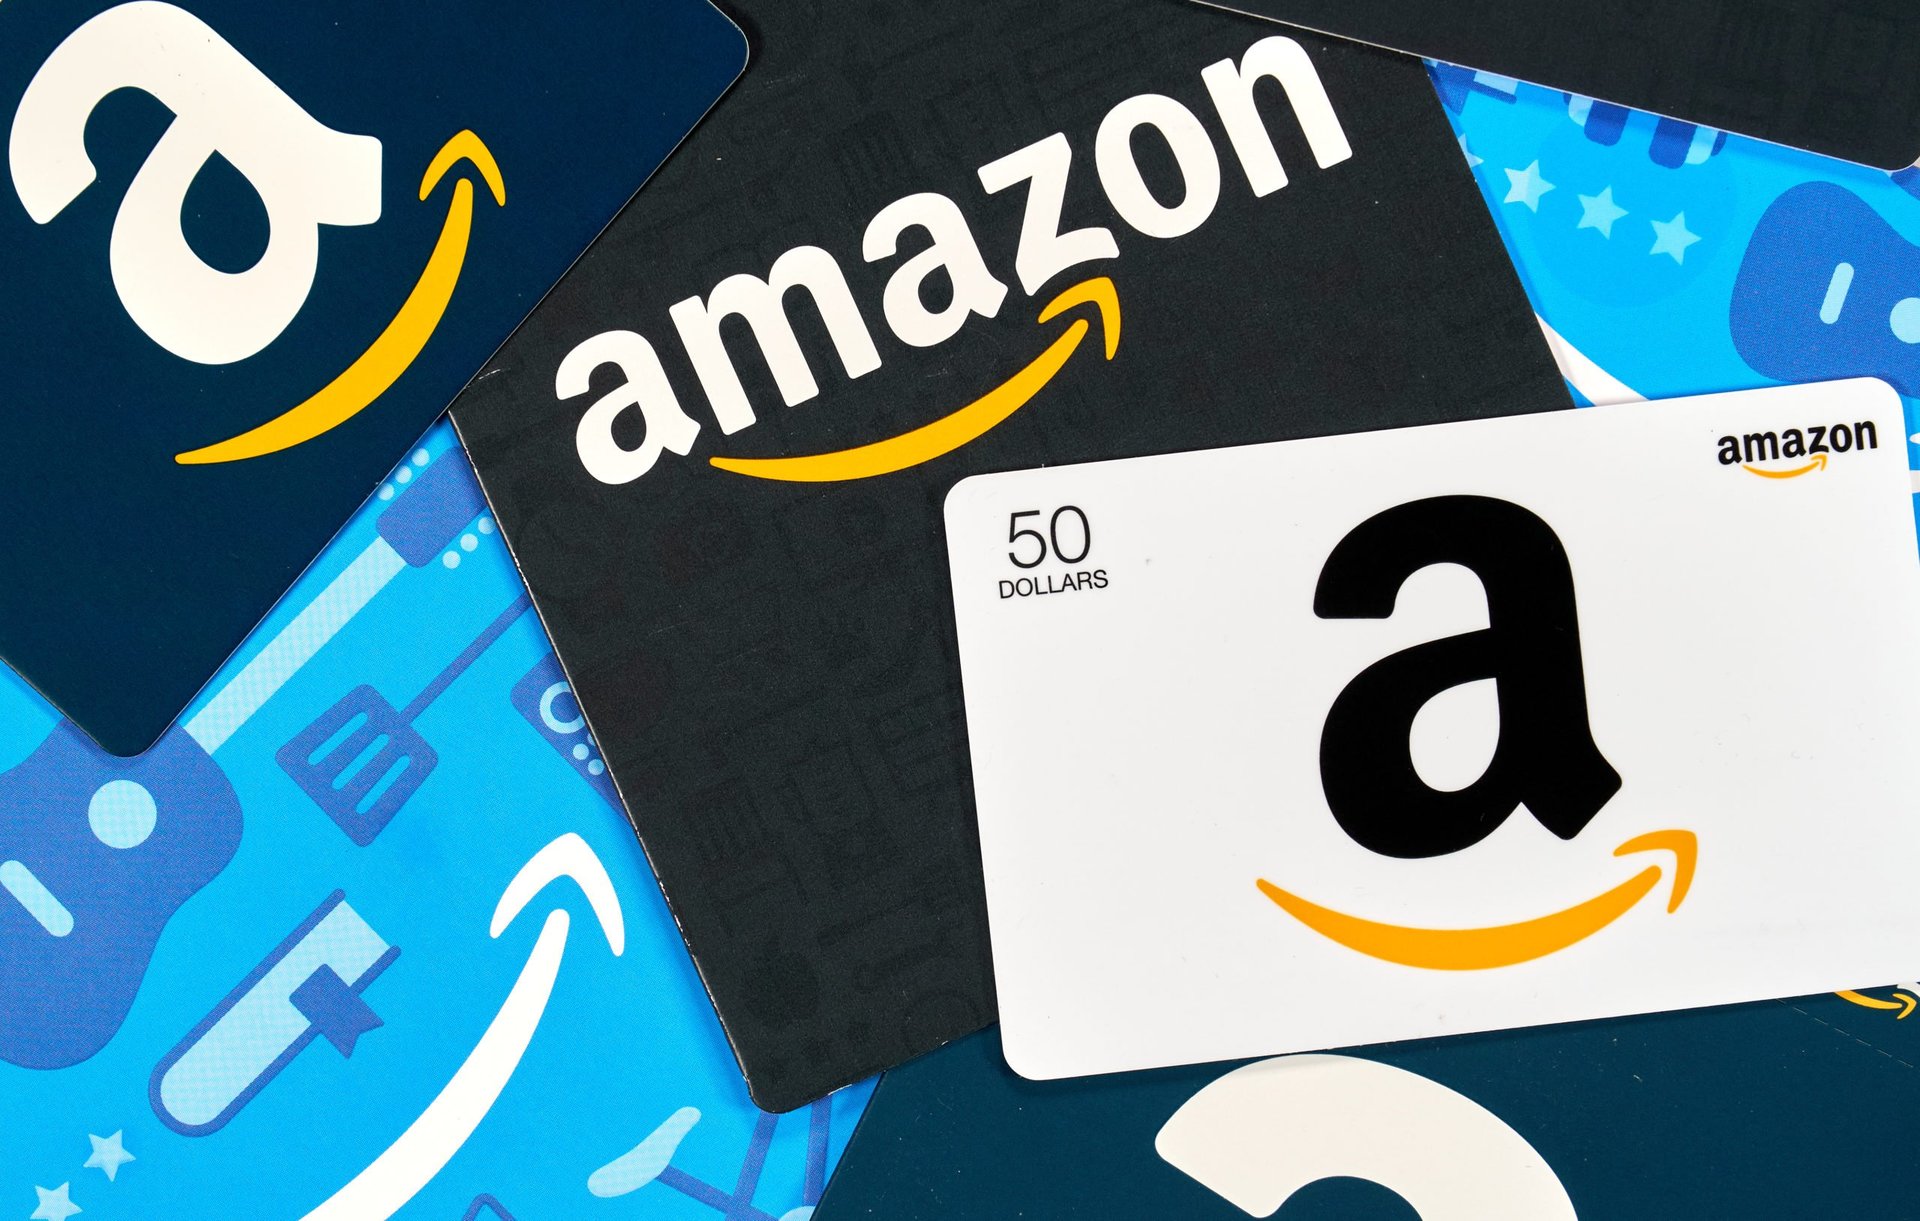 Amazon Gives $15 Free Credit score With Present Card Buy